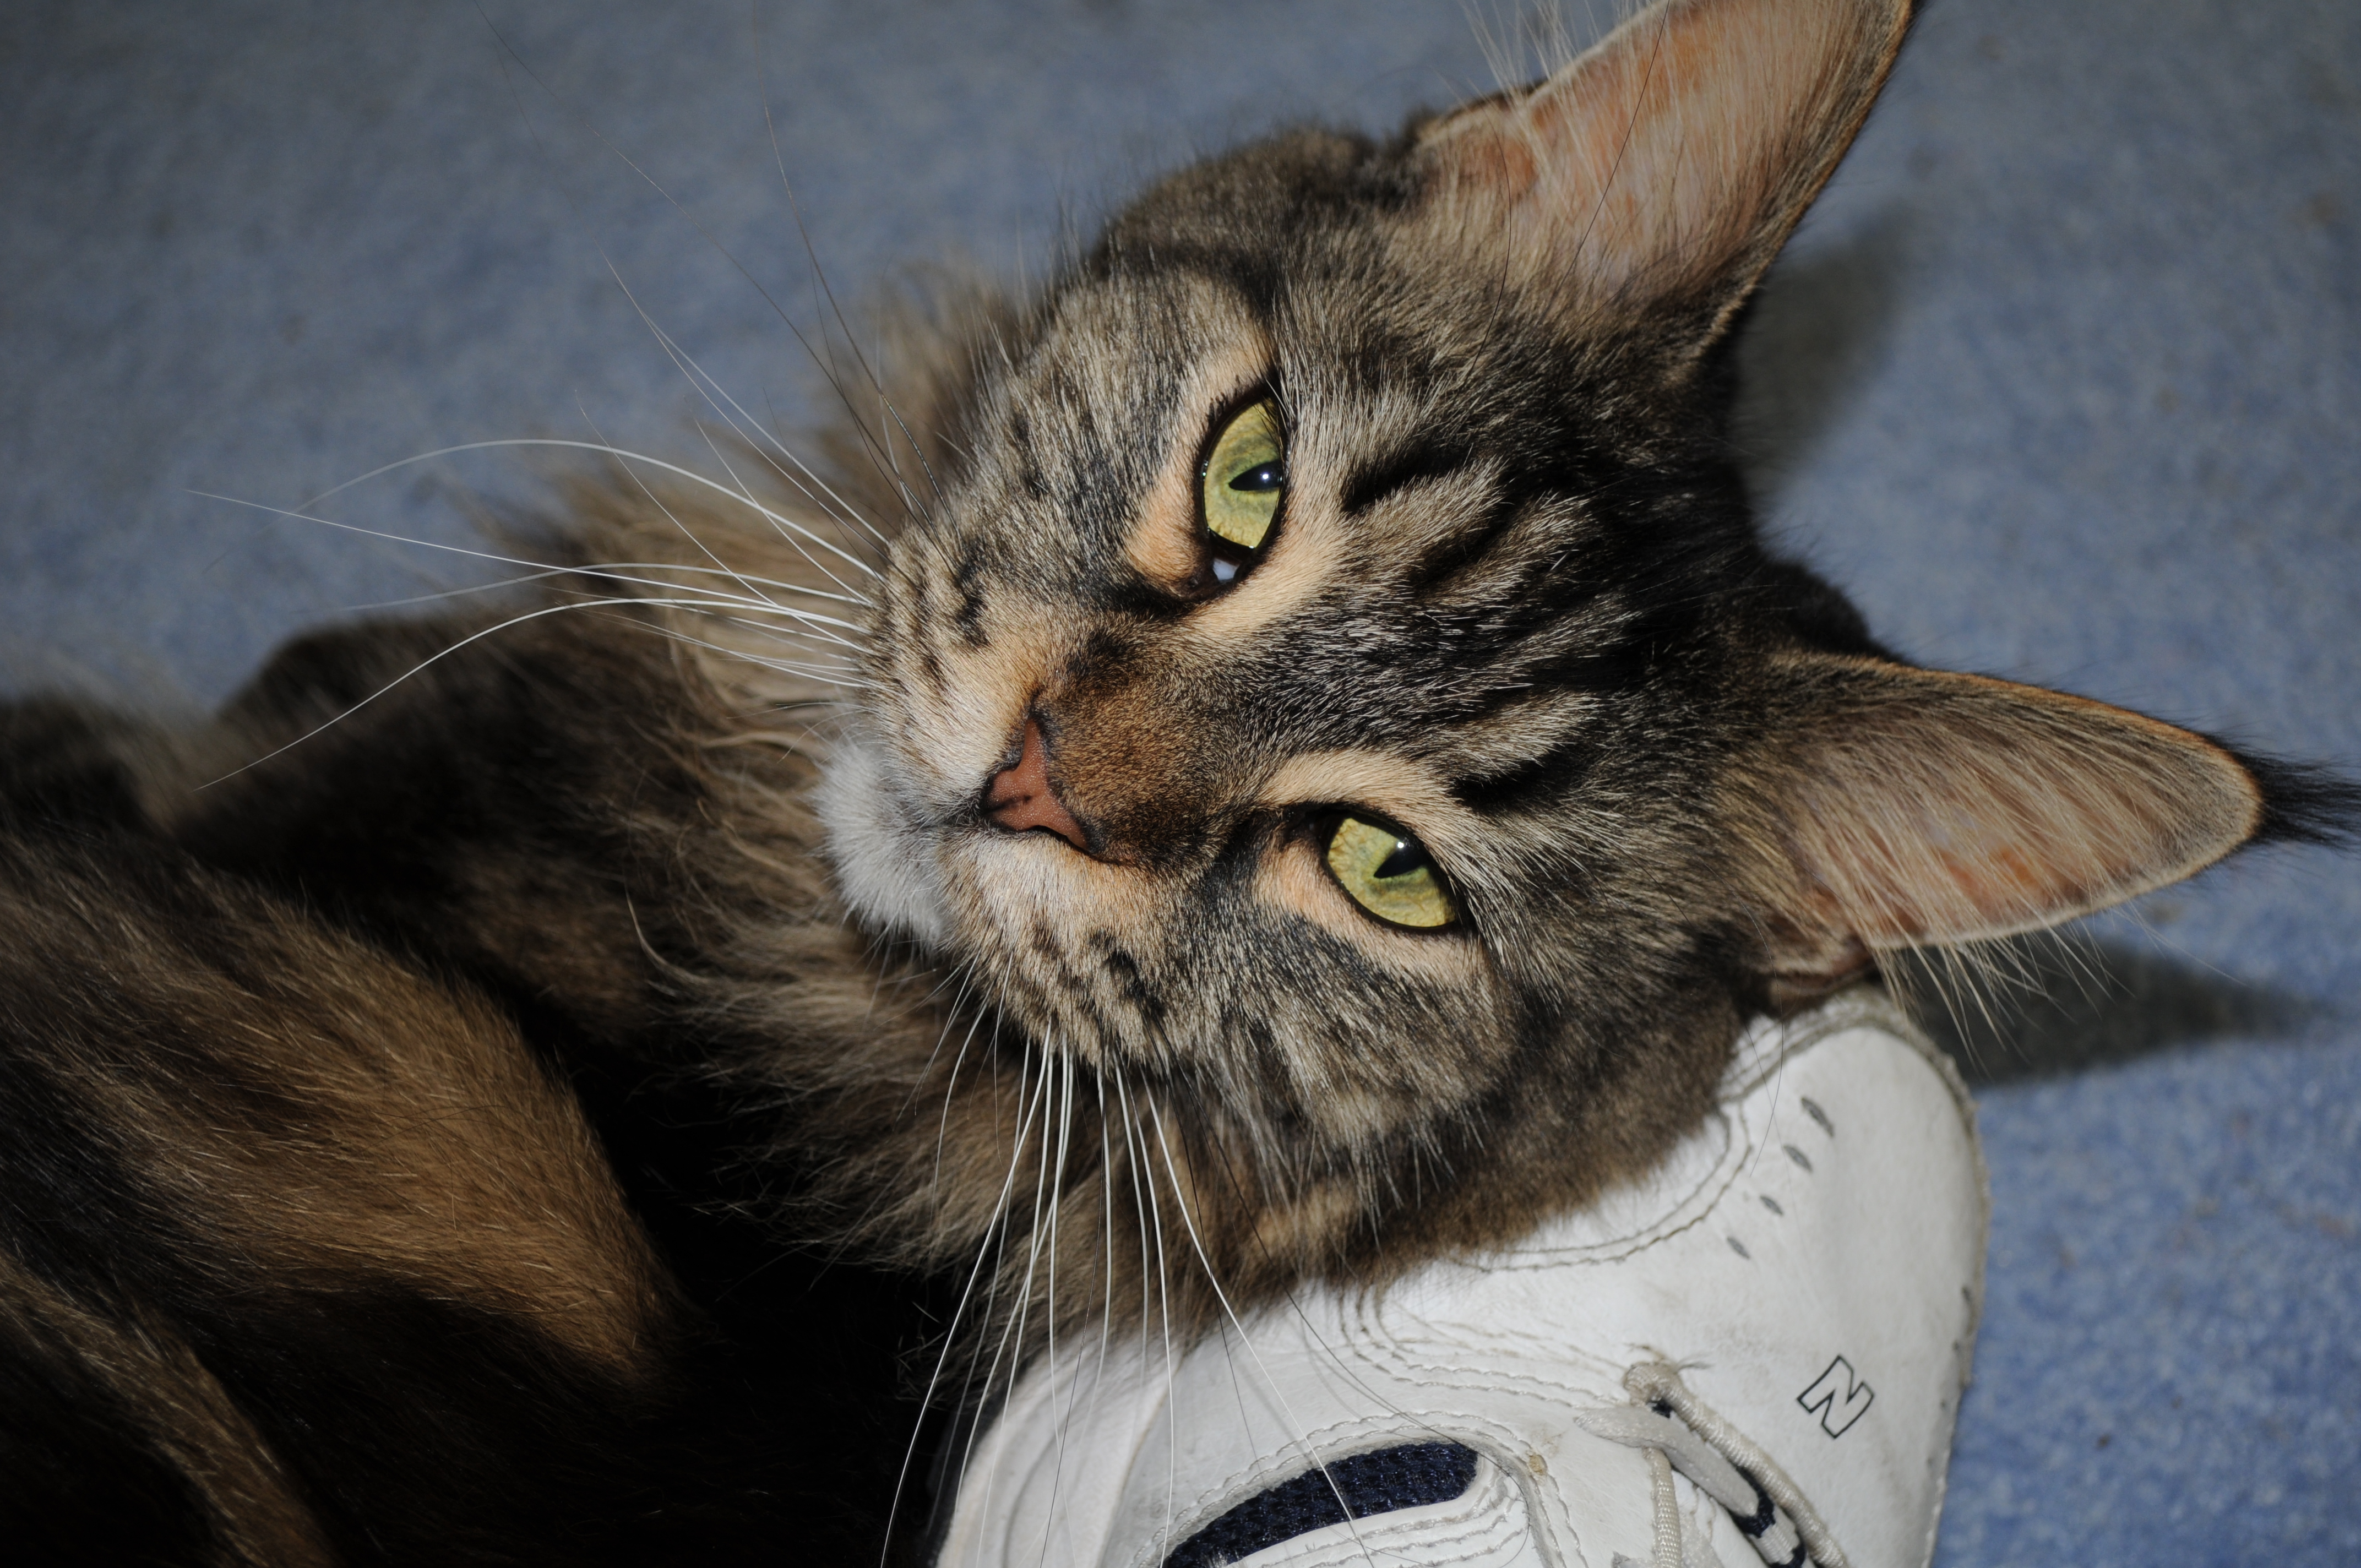 Maggie the cat lying on my shoe photo